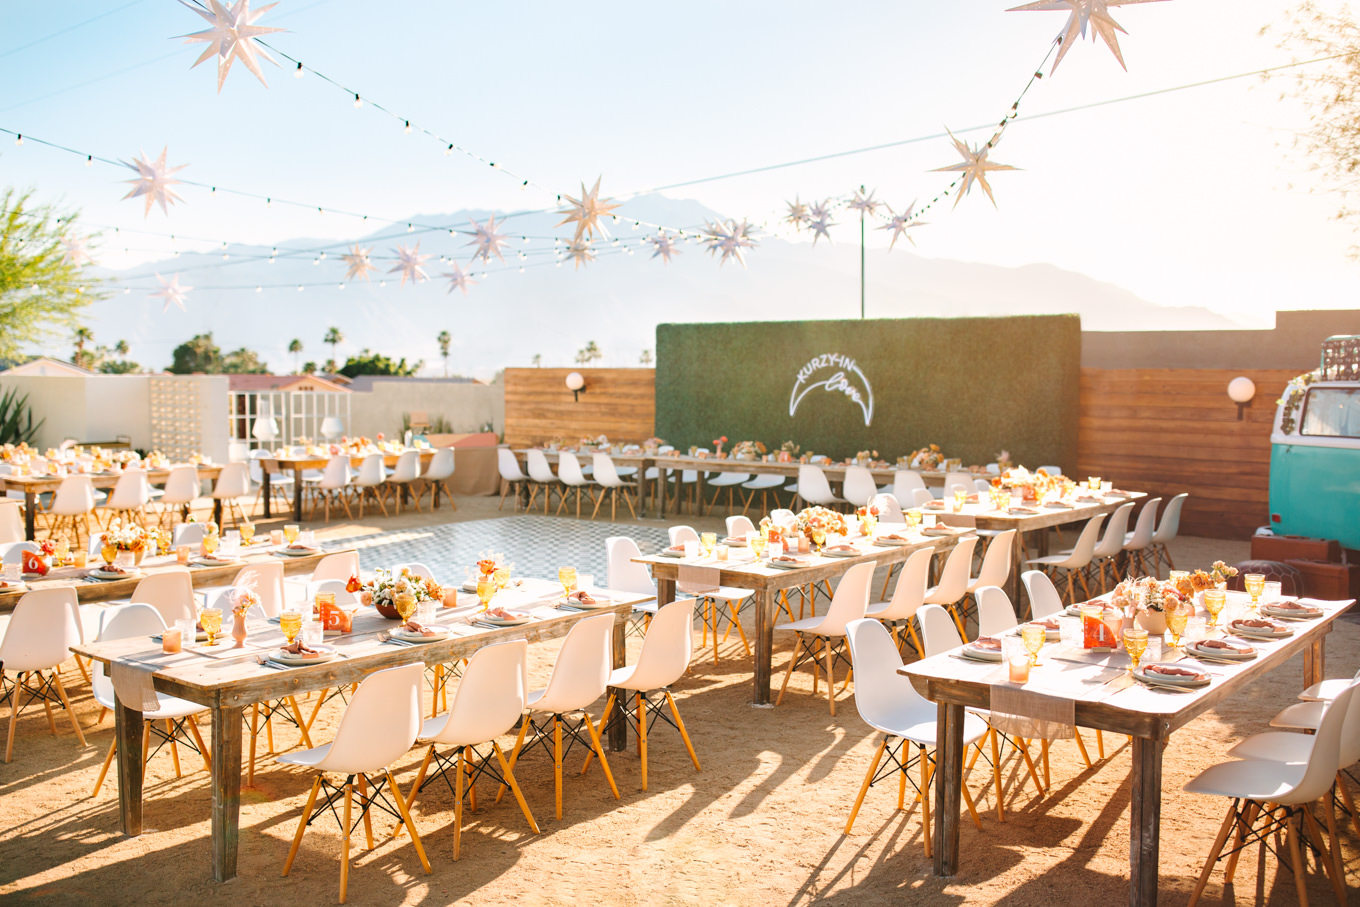 Wedding reception with stars and white bucket chairs | Pink and orange Lautner Compound wedding | Colorful Palm Springs wedding photography | #palmspringsphotographer #palmspringswedding #lautnercompound #southerncaliforniawedding  Source: Mary Costa Photography | Los Angeles